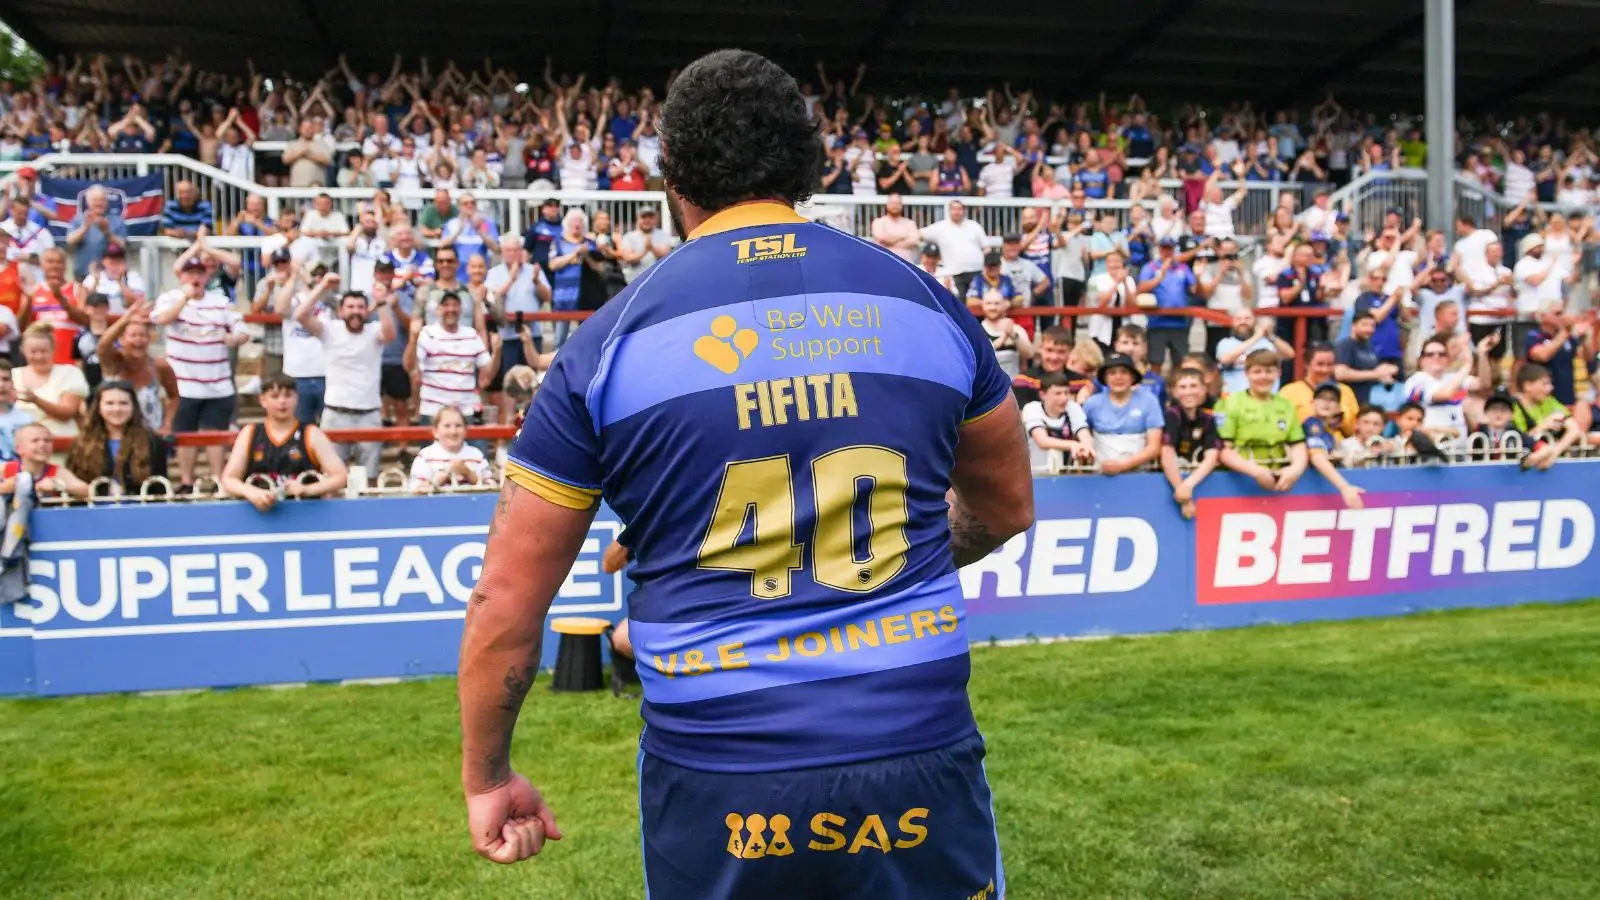 David Fifita bar, St Helens CEO on TV: the rugby league moments you missed this week